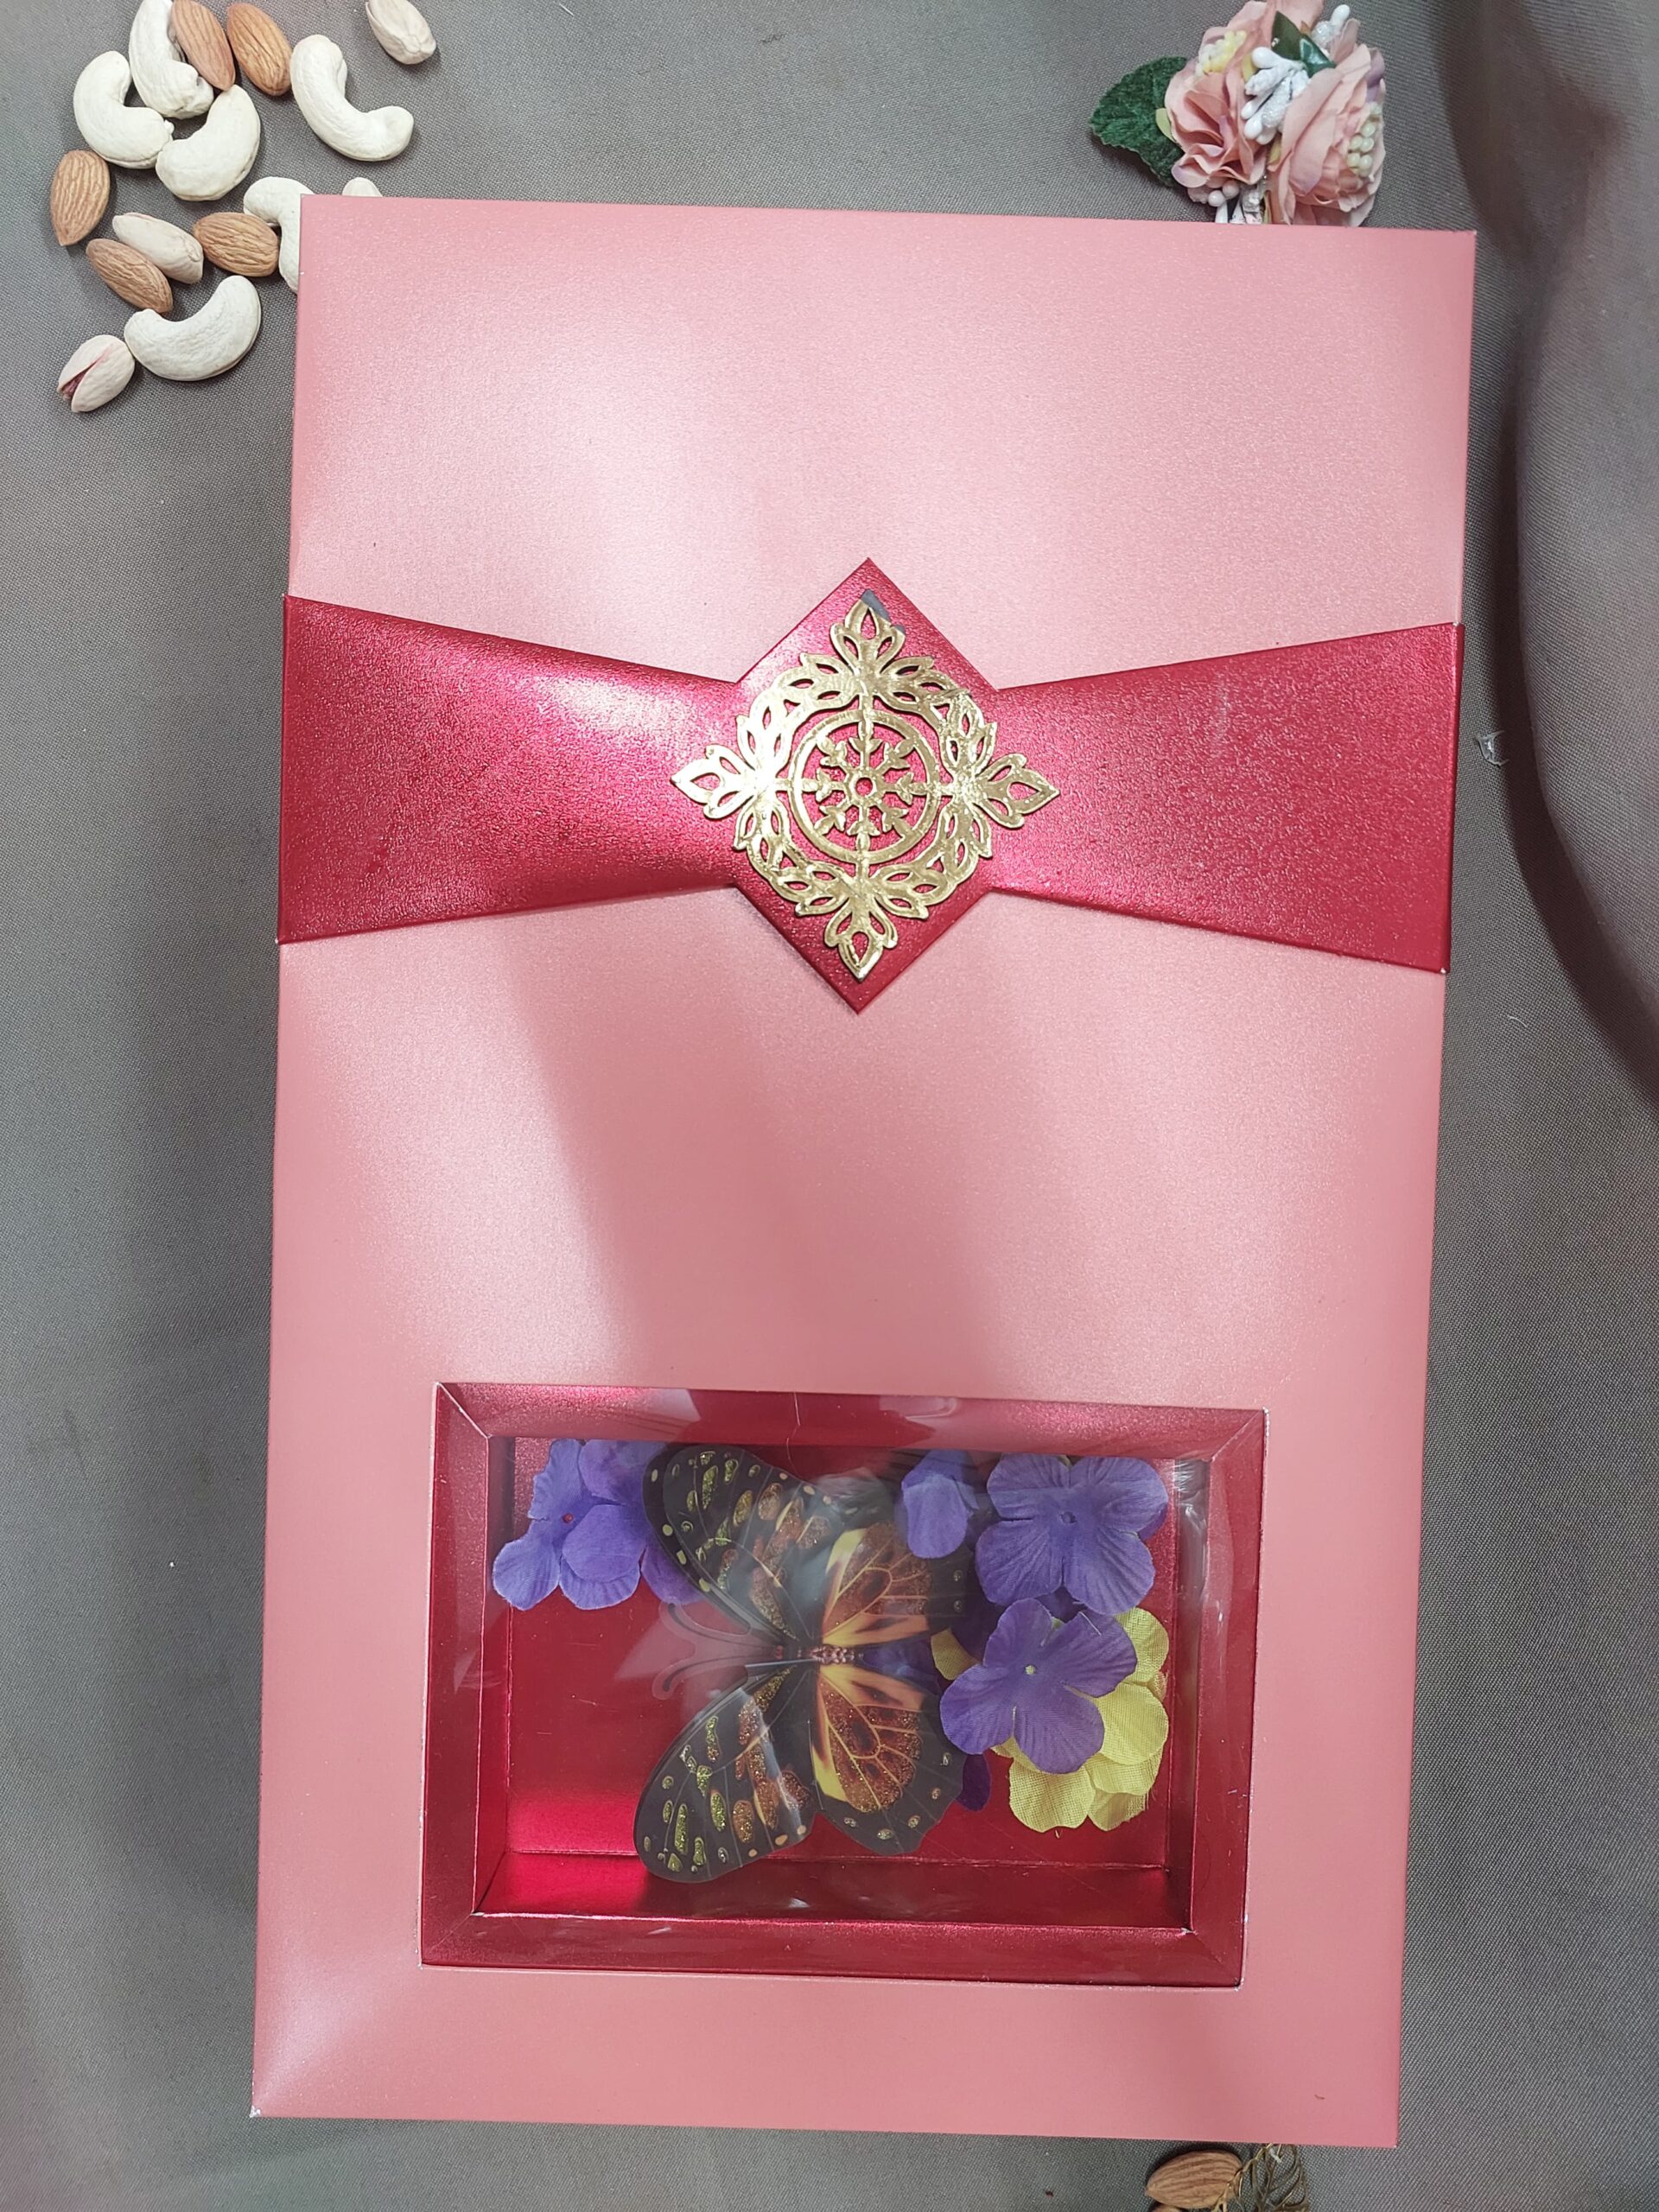 product-grid-gallery-item Dryfruits Gift Box